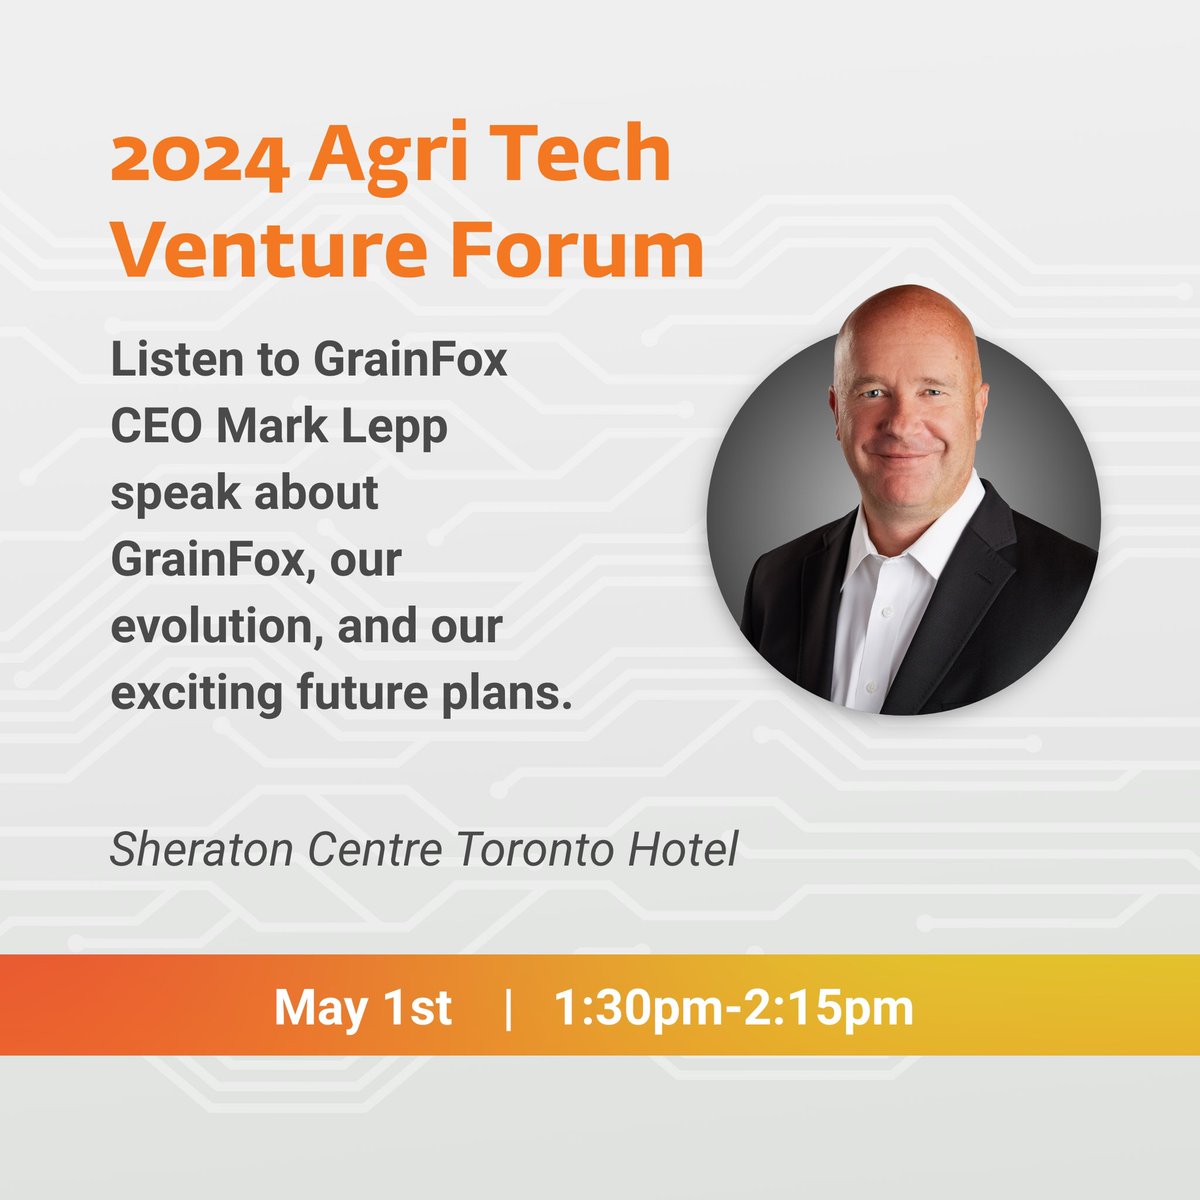 💻 Hey Ag Tech Leaders, Innovators, Investors, & Corporate Visionaries! Join @marklepp in Toronto for the 2024 @AGRIForums at the Sheraton Centre Toronto Hotel May 1st, 1:30pm-2:15pm in the Company Showcase. Let's connect & shape the future of ag together!
 
#AGRIForum #agtech